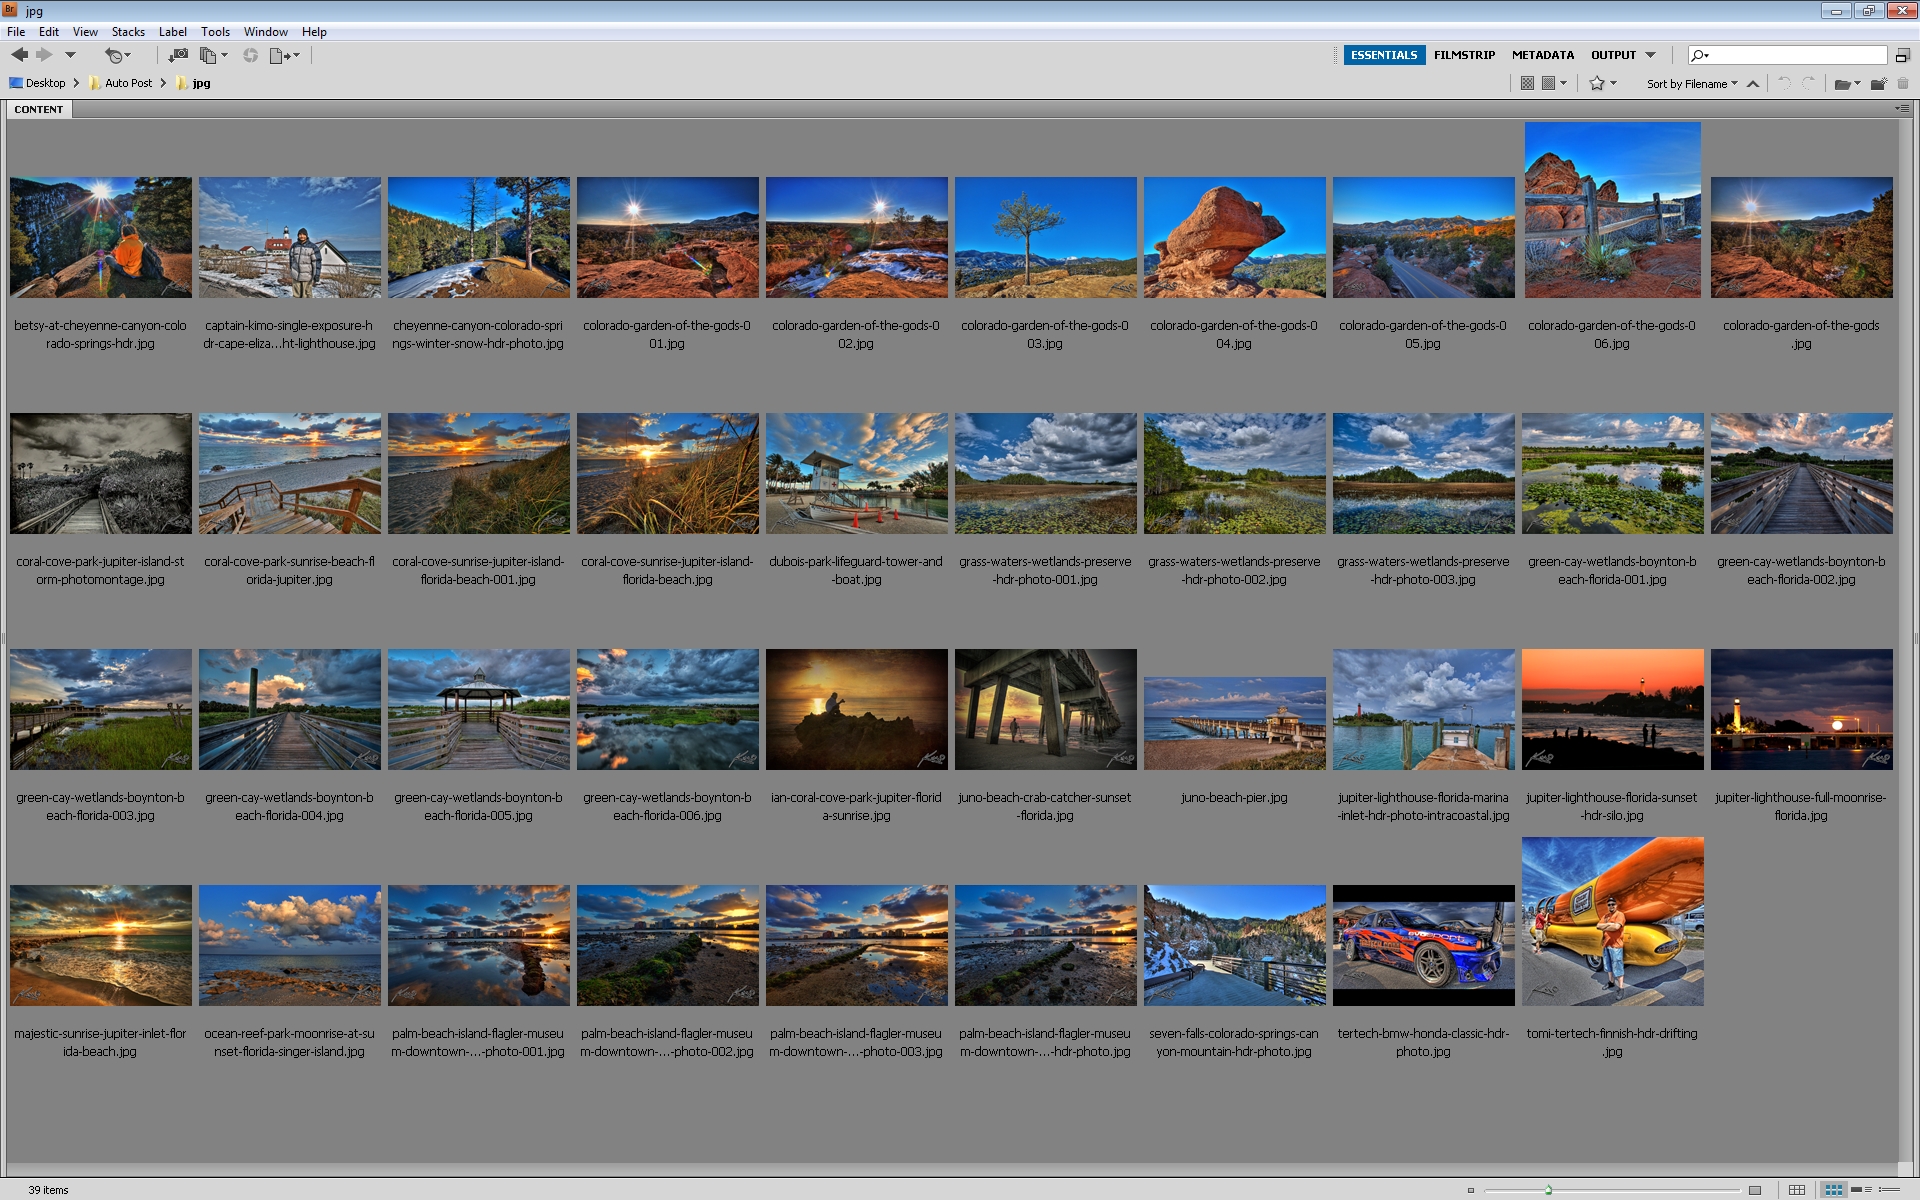 Working on 100 HDR posts before I leave.